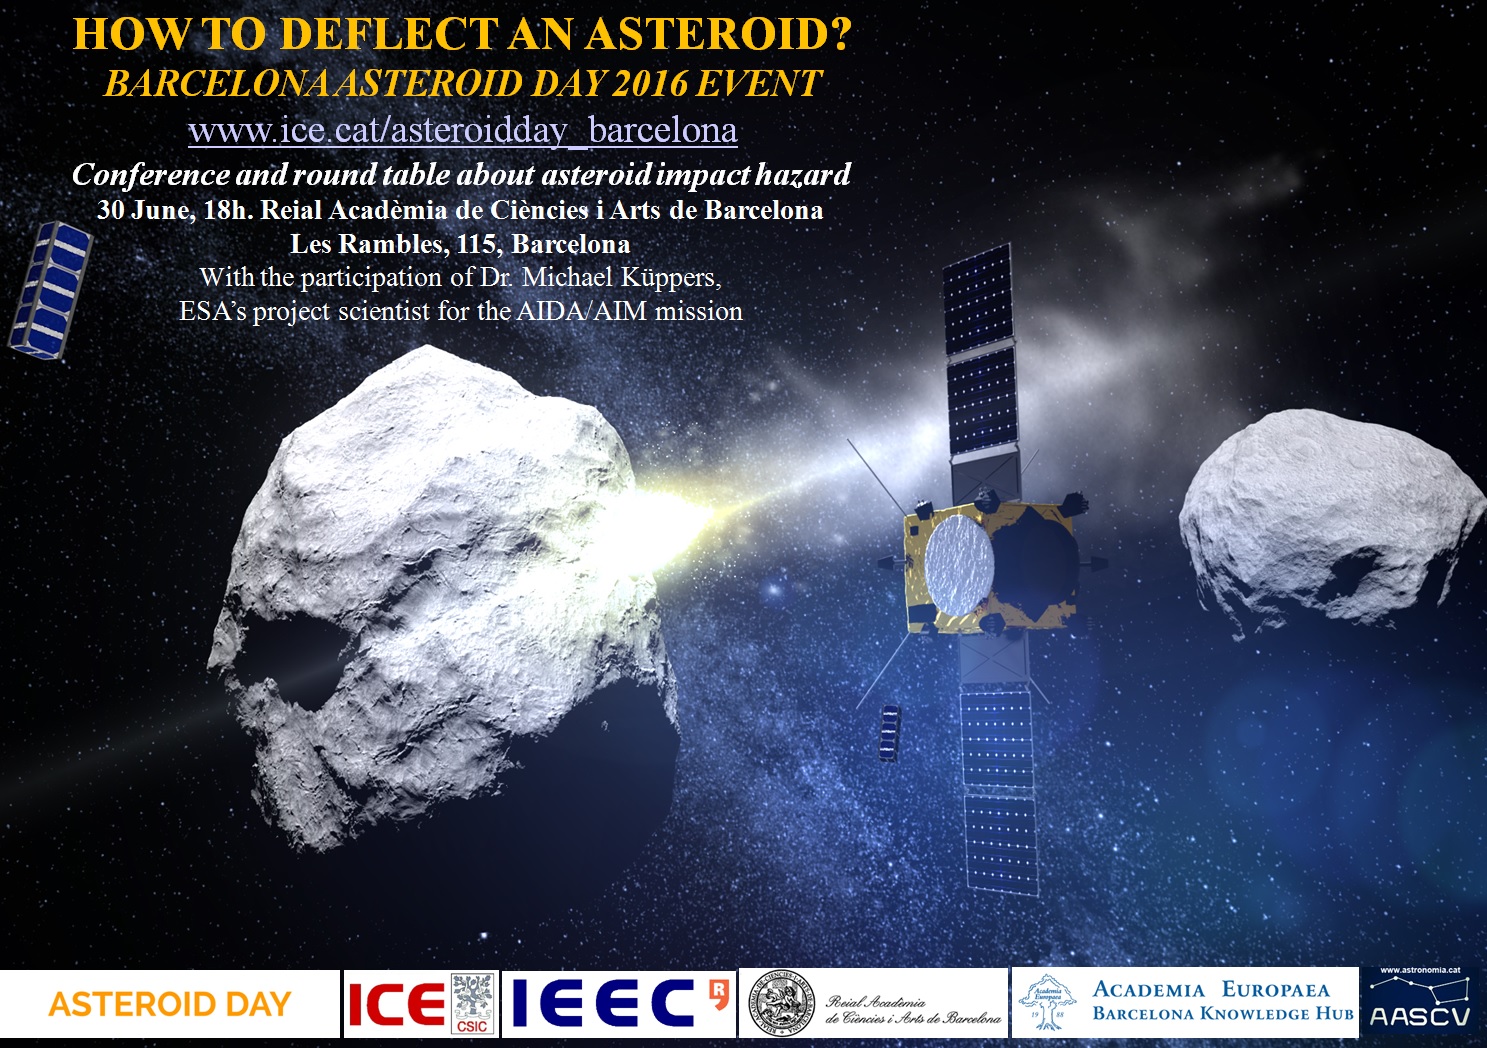 Asteroid Day. Are we able to divert potentially hazardous asteroids?